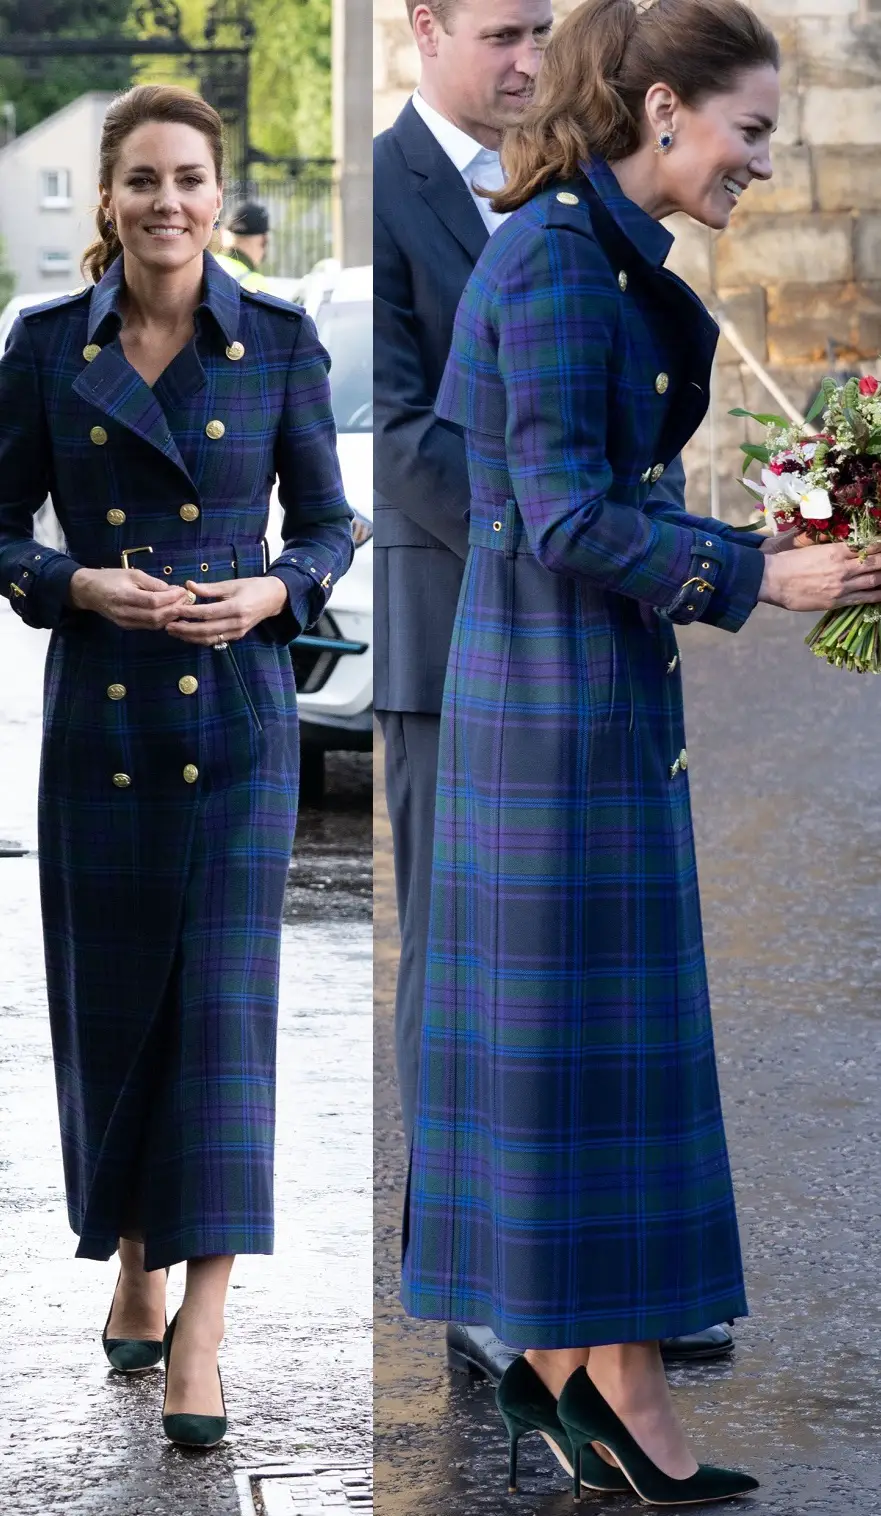 The Duchess of cambridge chose Holland Cooper tartan coat with Queen's earrings for the screening of Cruella at the Palace